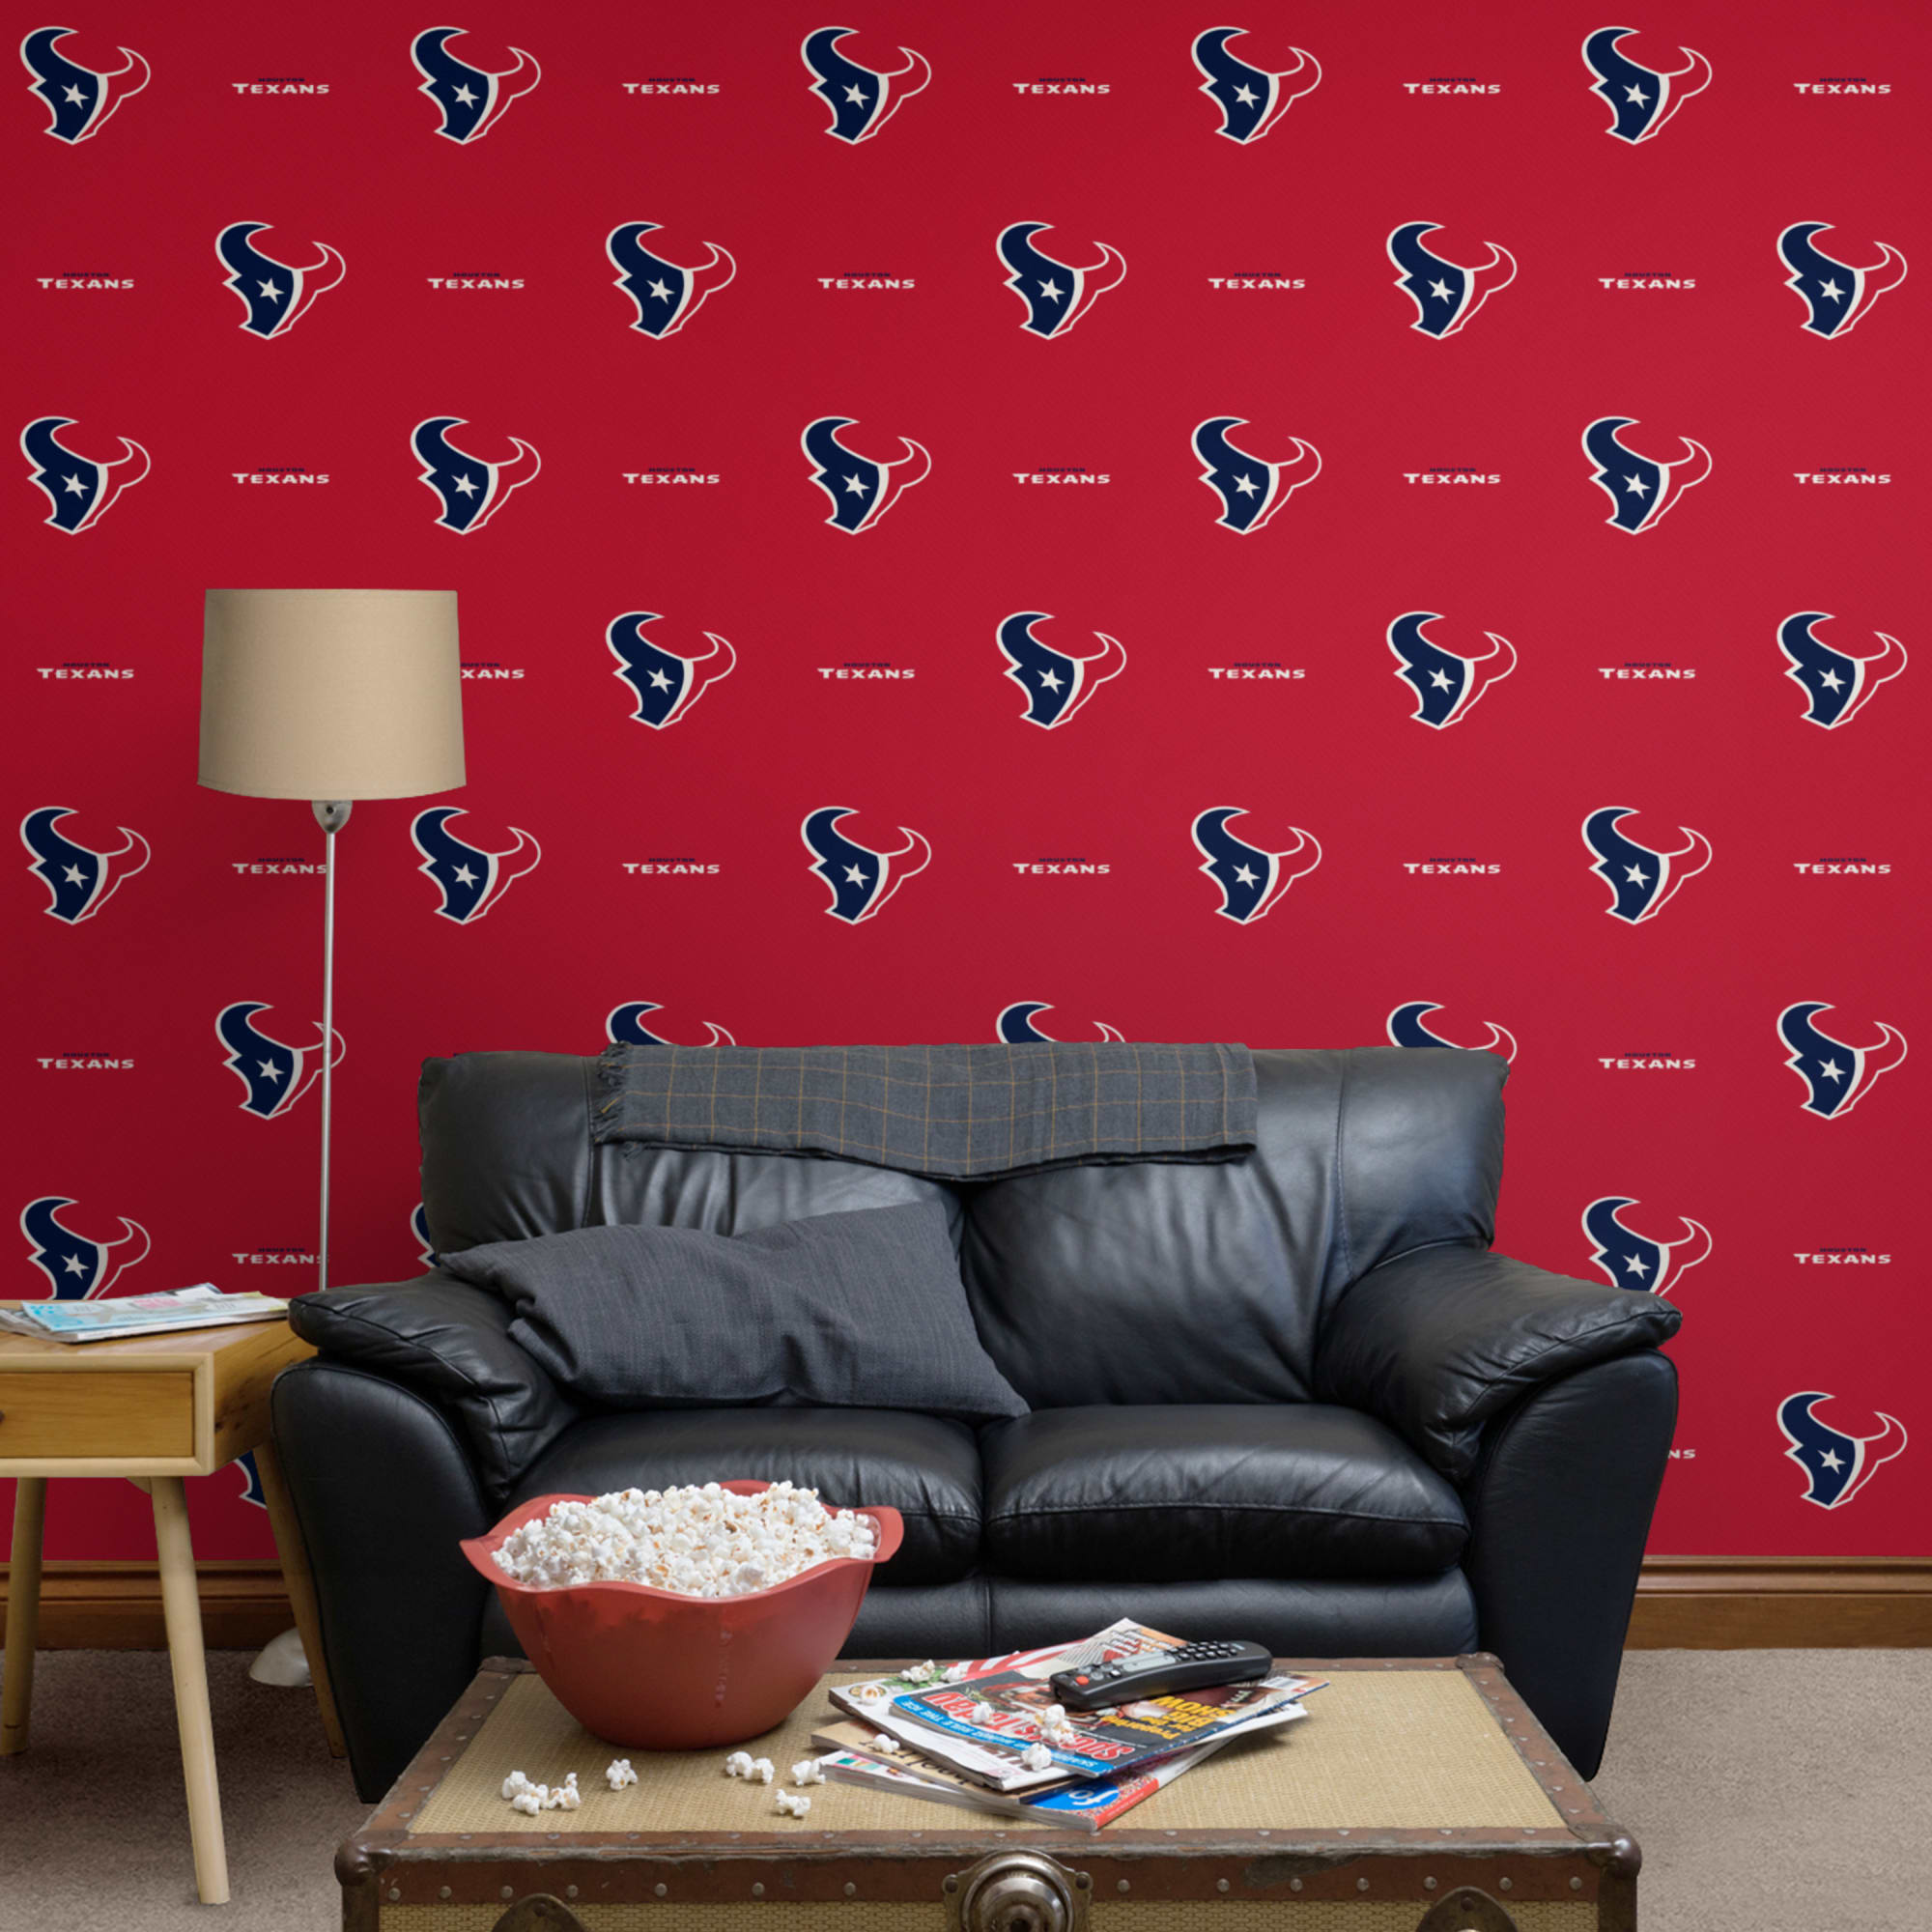 Houston Texans: Line Pattern - Officially Licensed NFL Removable Wallpaper 12" x 12" Sample by Fathead